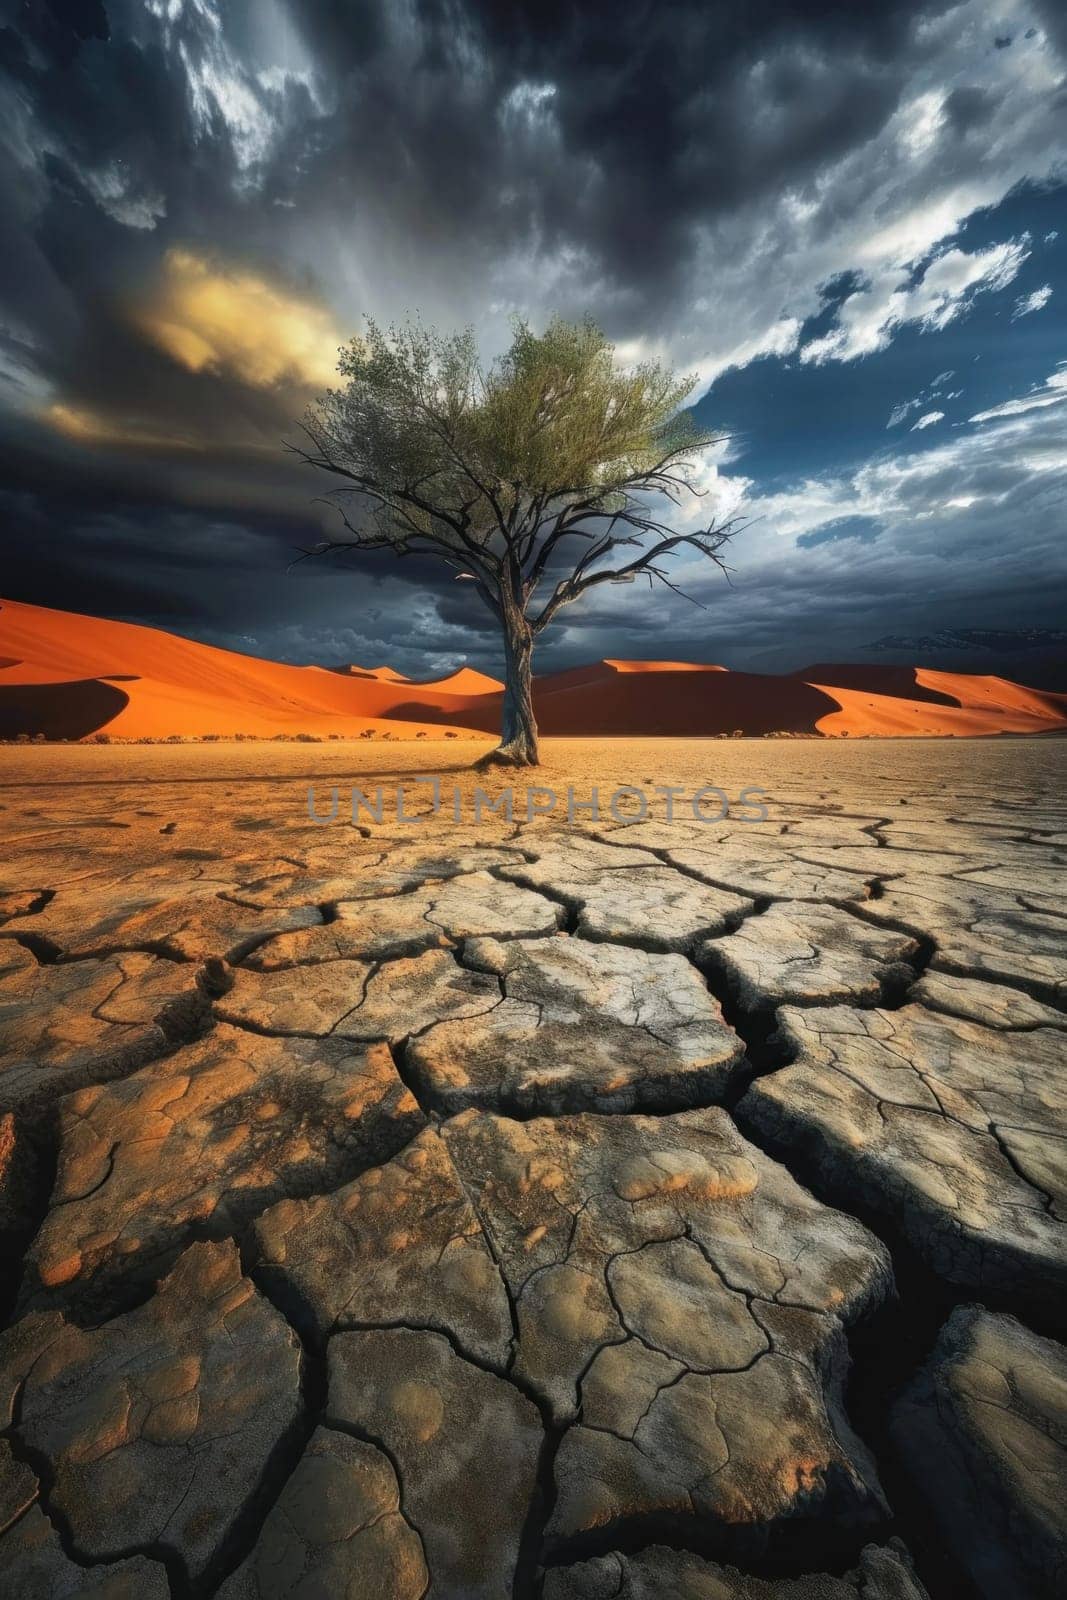 Solitary tree in dry desert under stormy sky symbol of resilience and survival amid harsh conditions by Vichizh